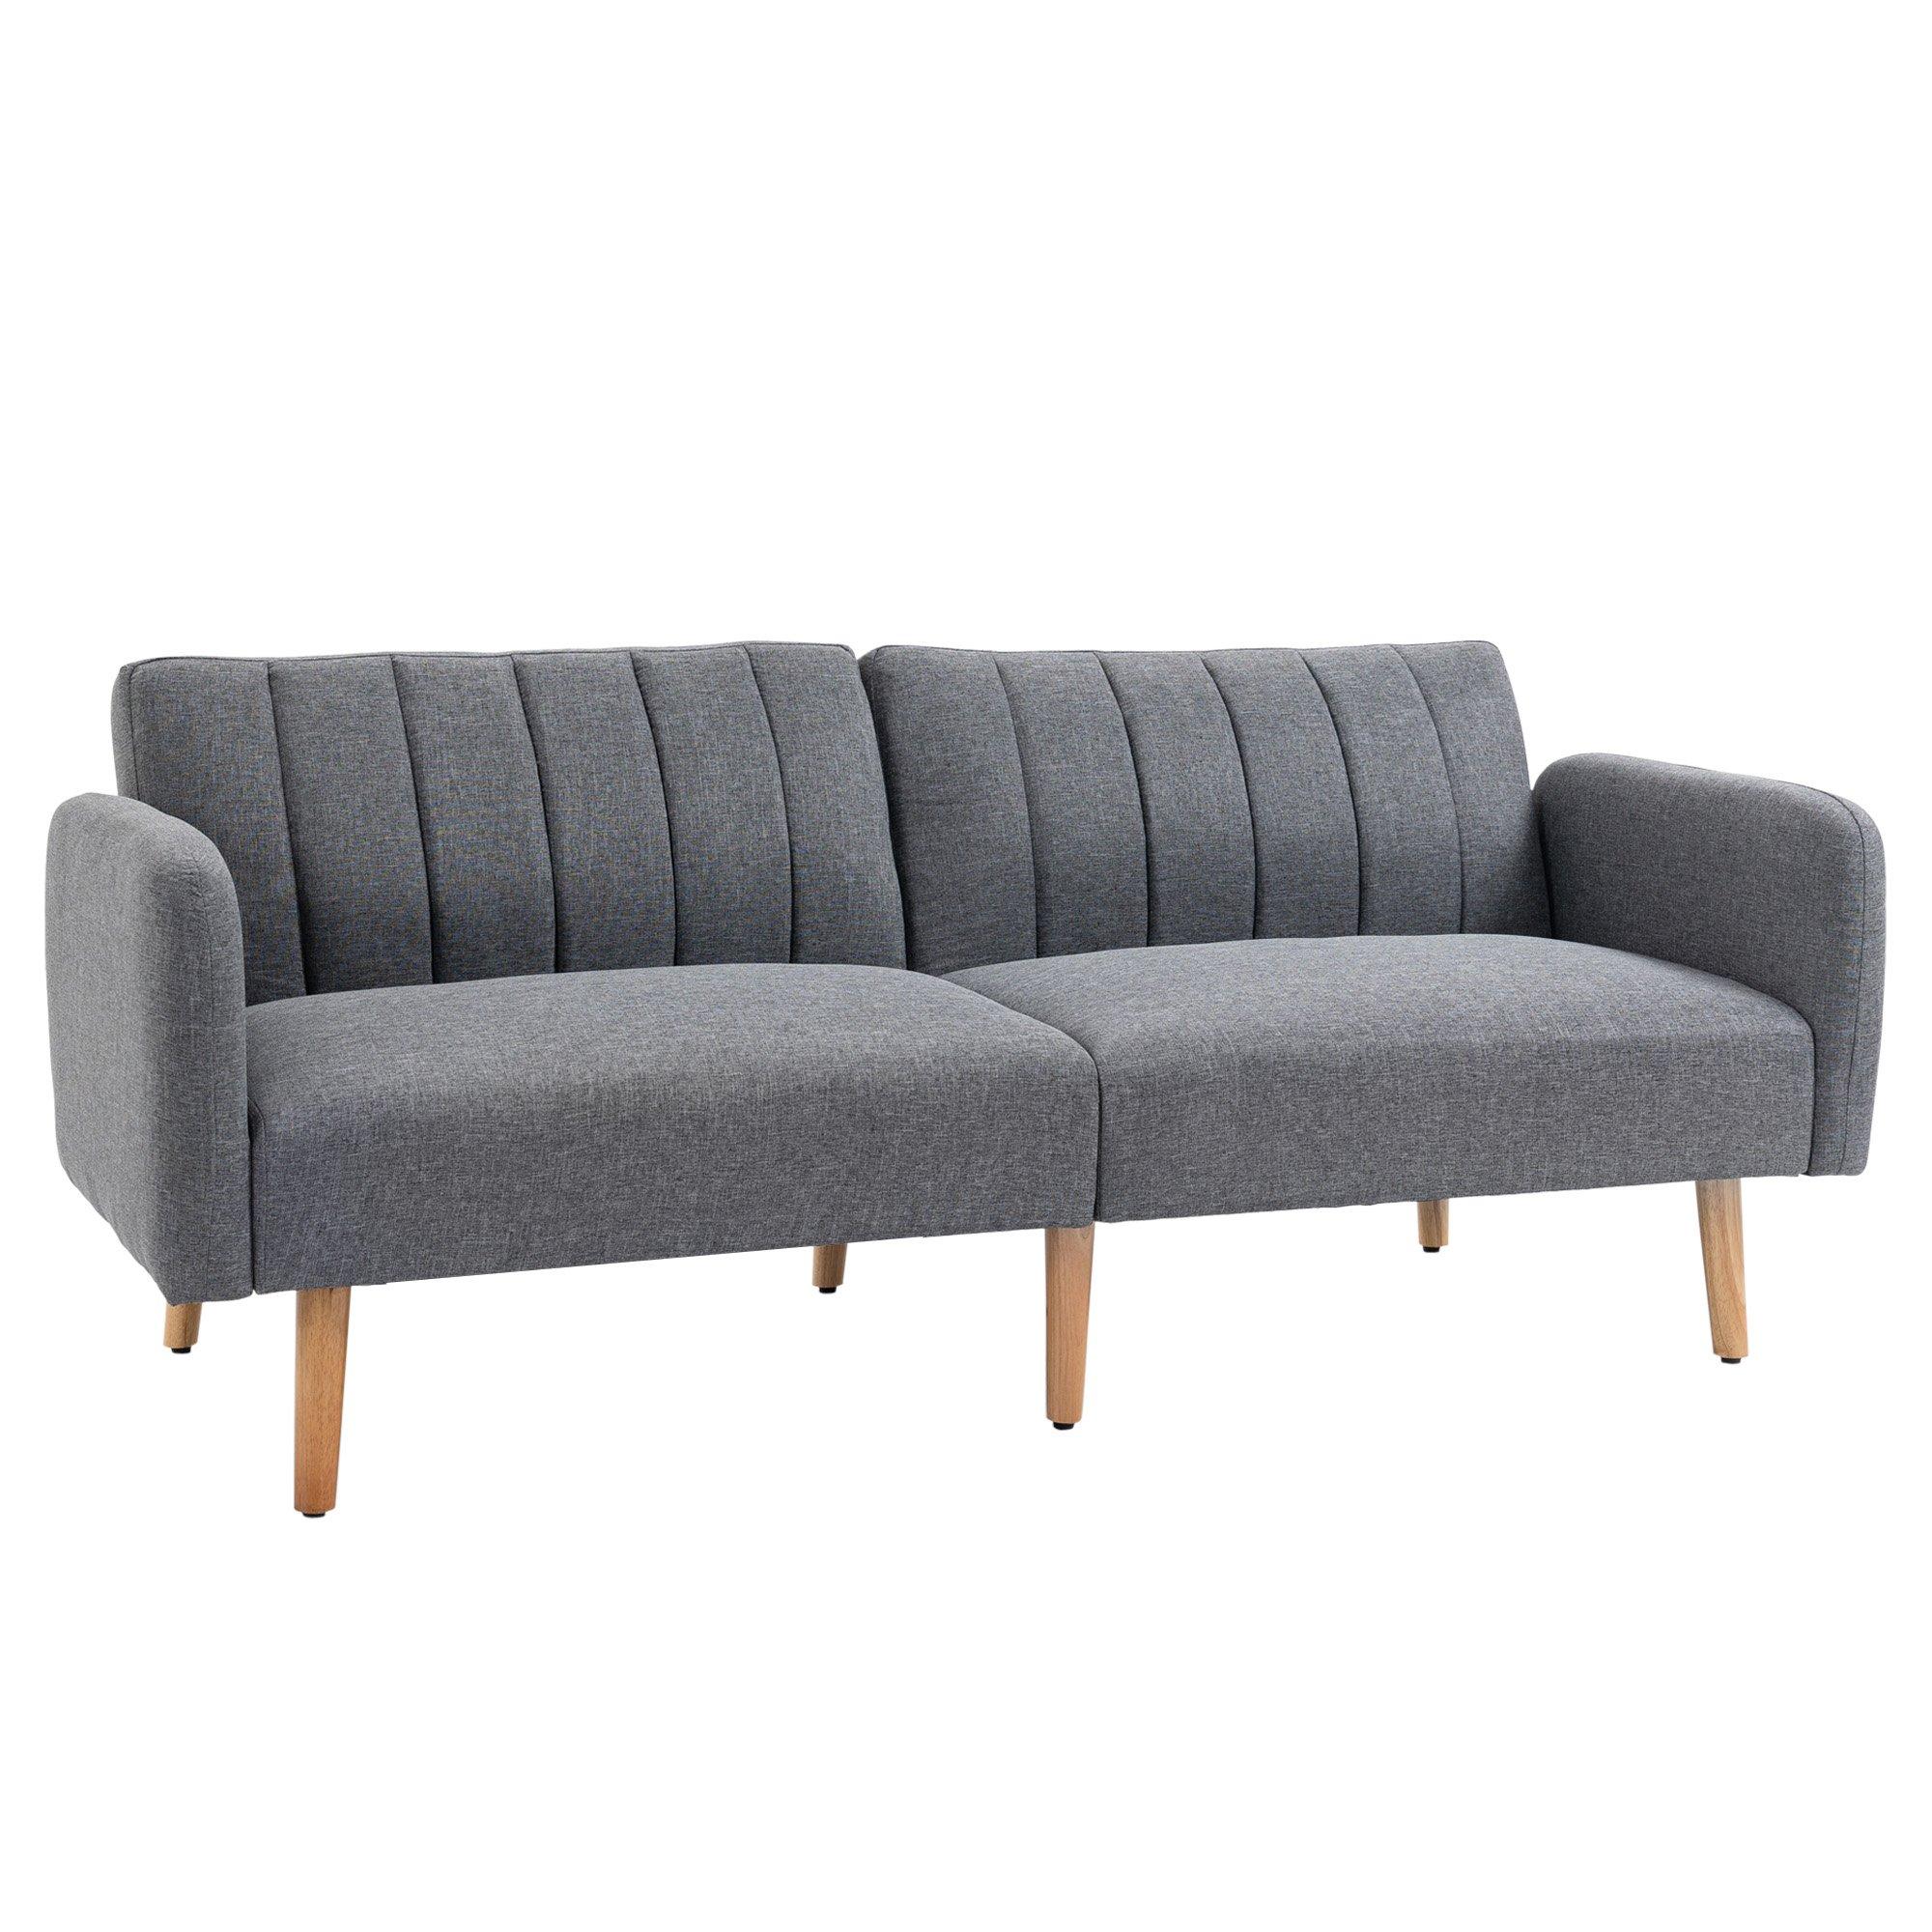 2 Seater Sofa Bed Sofa Couch With Adjustable Backrest Linen